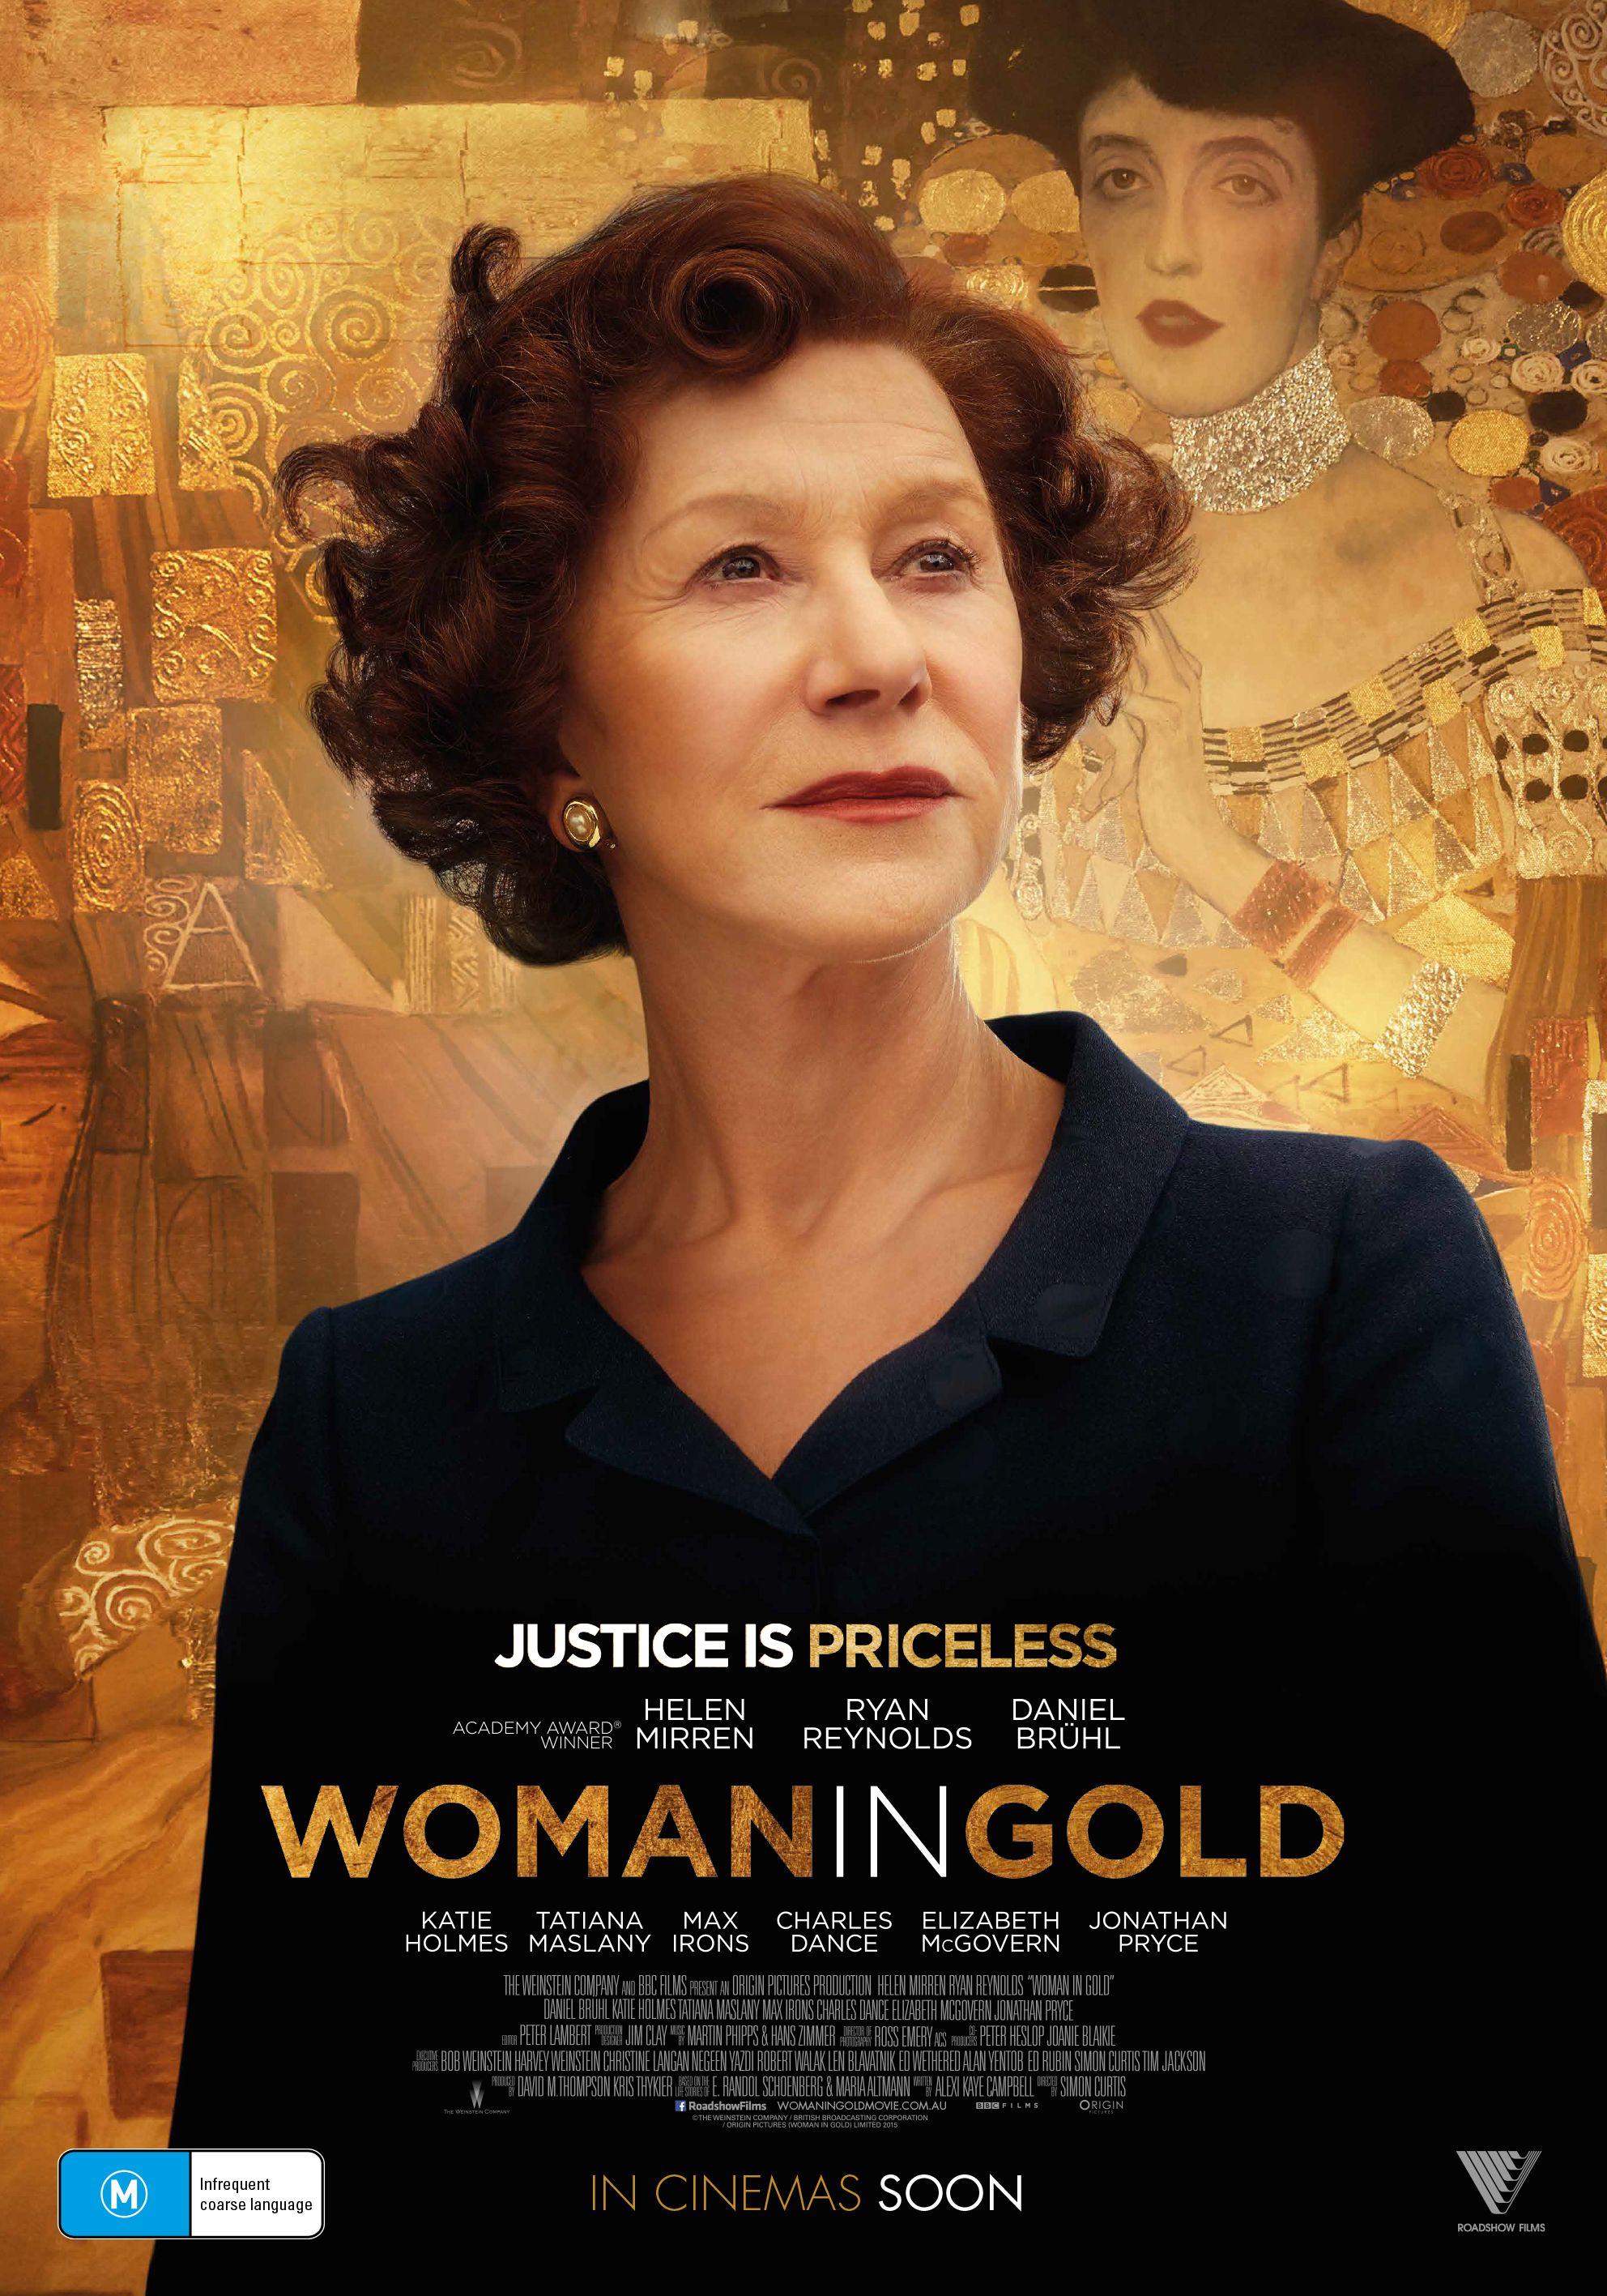 ad for 2015 film, “Woman in Gold” - Google Search | ICE 150 ...